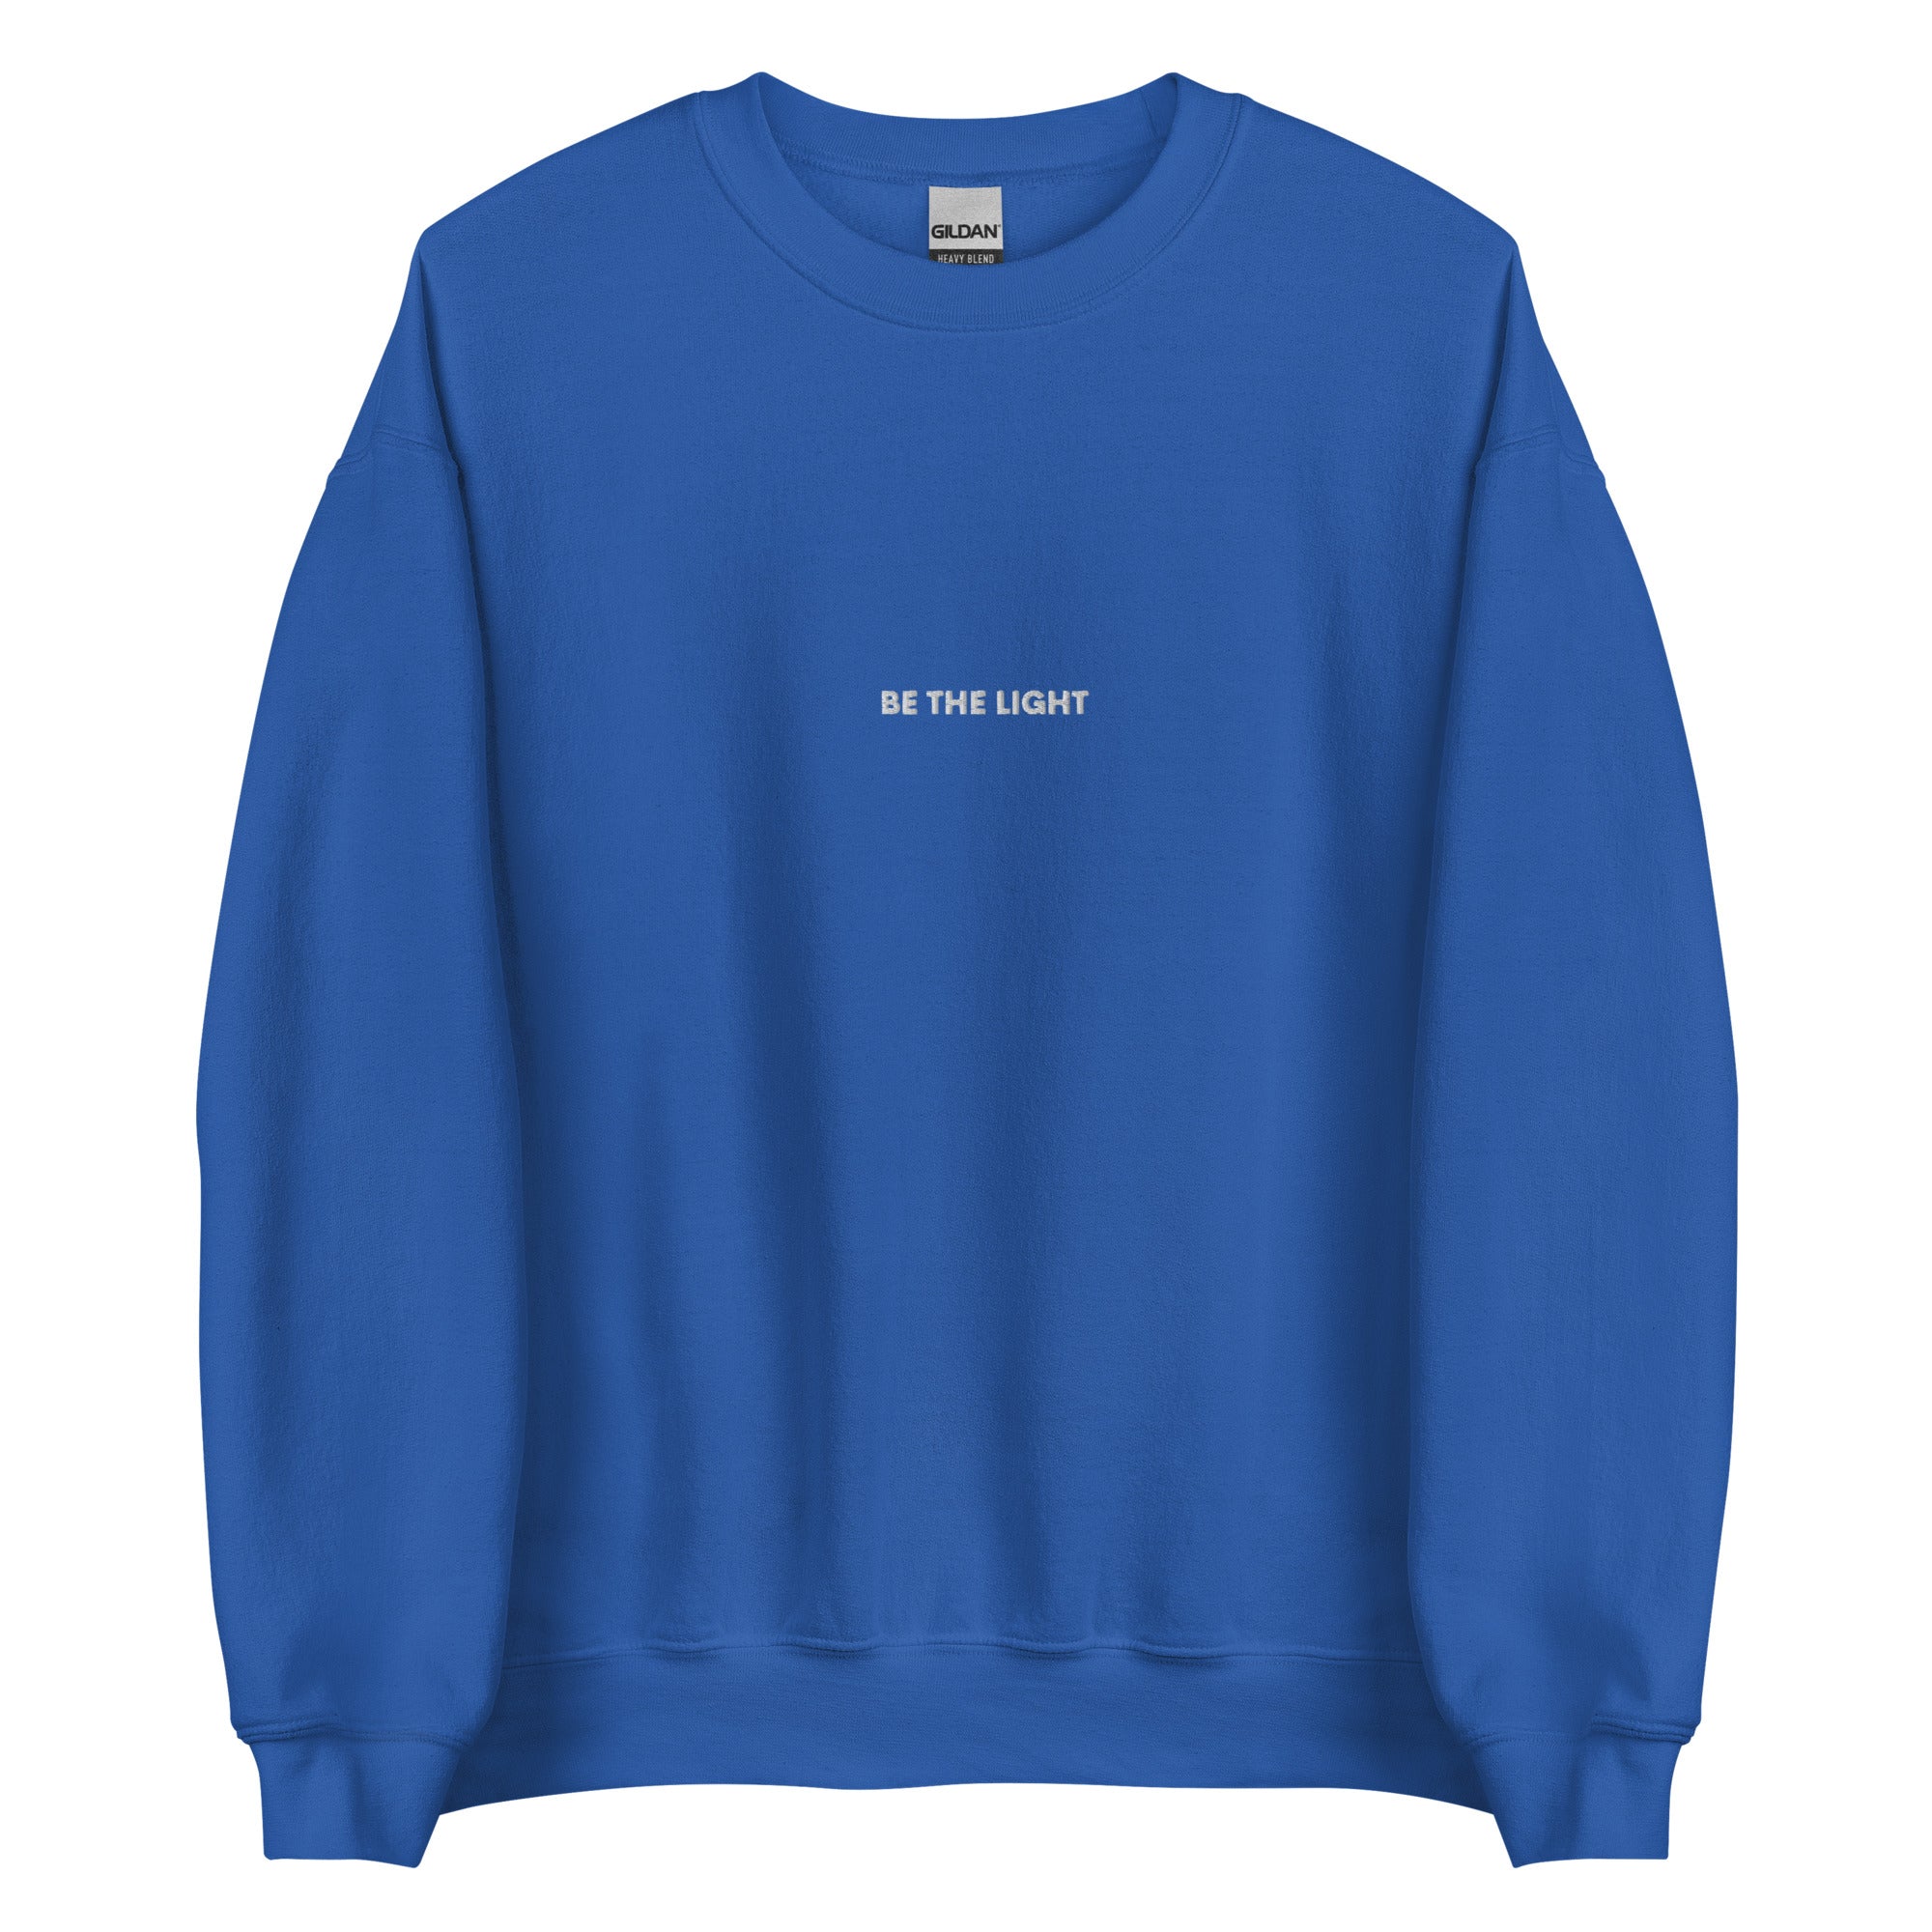 Reasons To Stay Crewneck